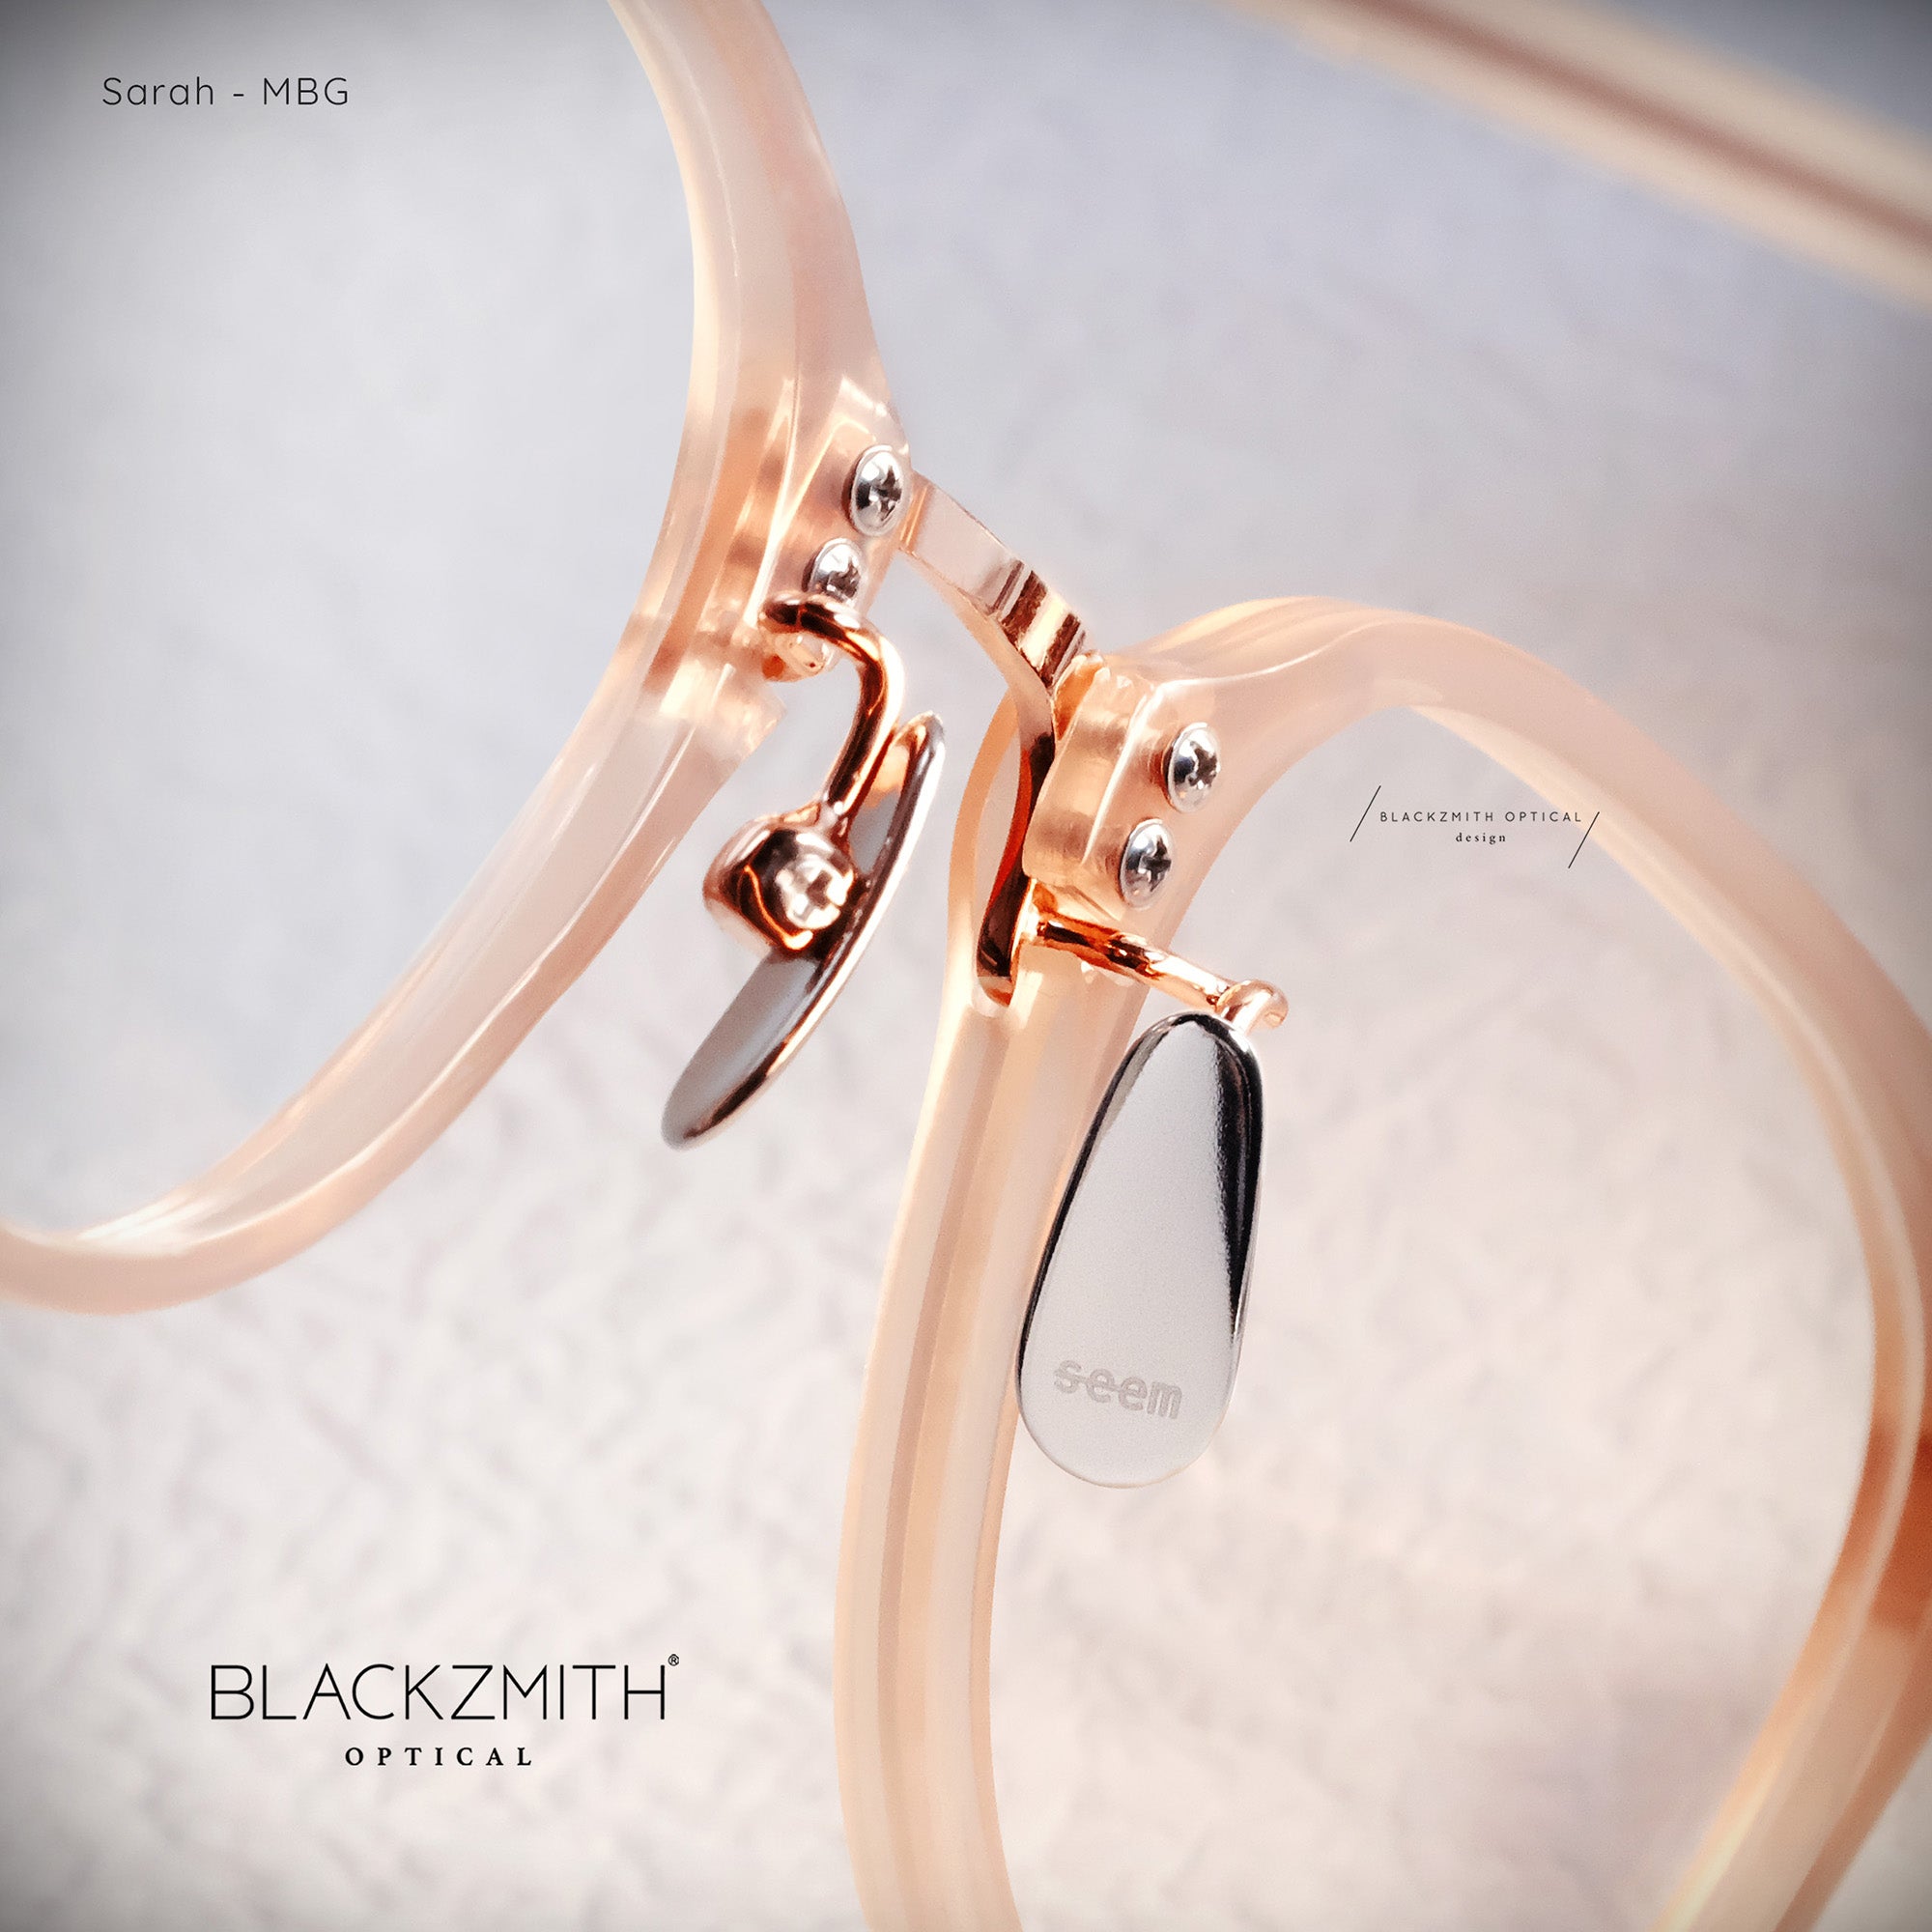 Oh My Glasses - Sarah omg-120-MBG-48【 Blackzmith Exclusive Limited Edition】